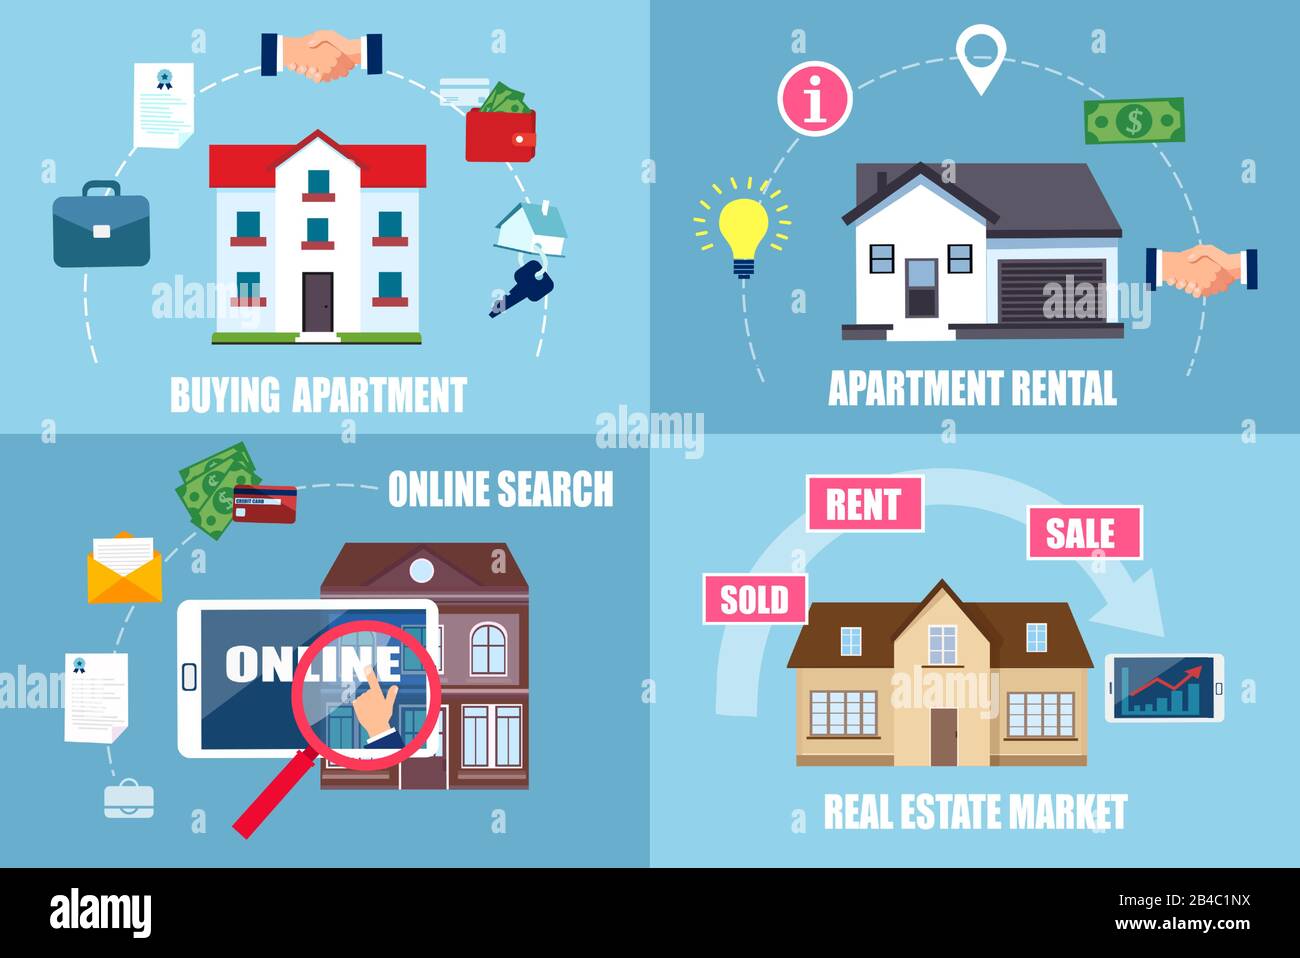 Real estate concept. Vector of a process of buying and searching online an apartment or home Stock Vector